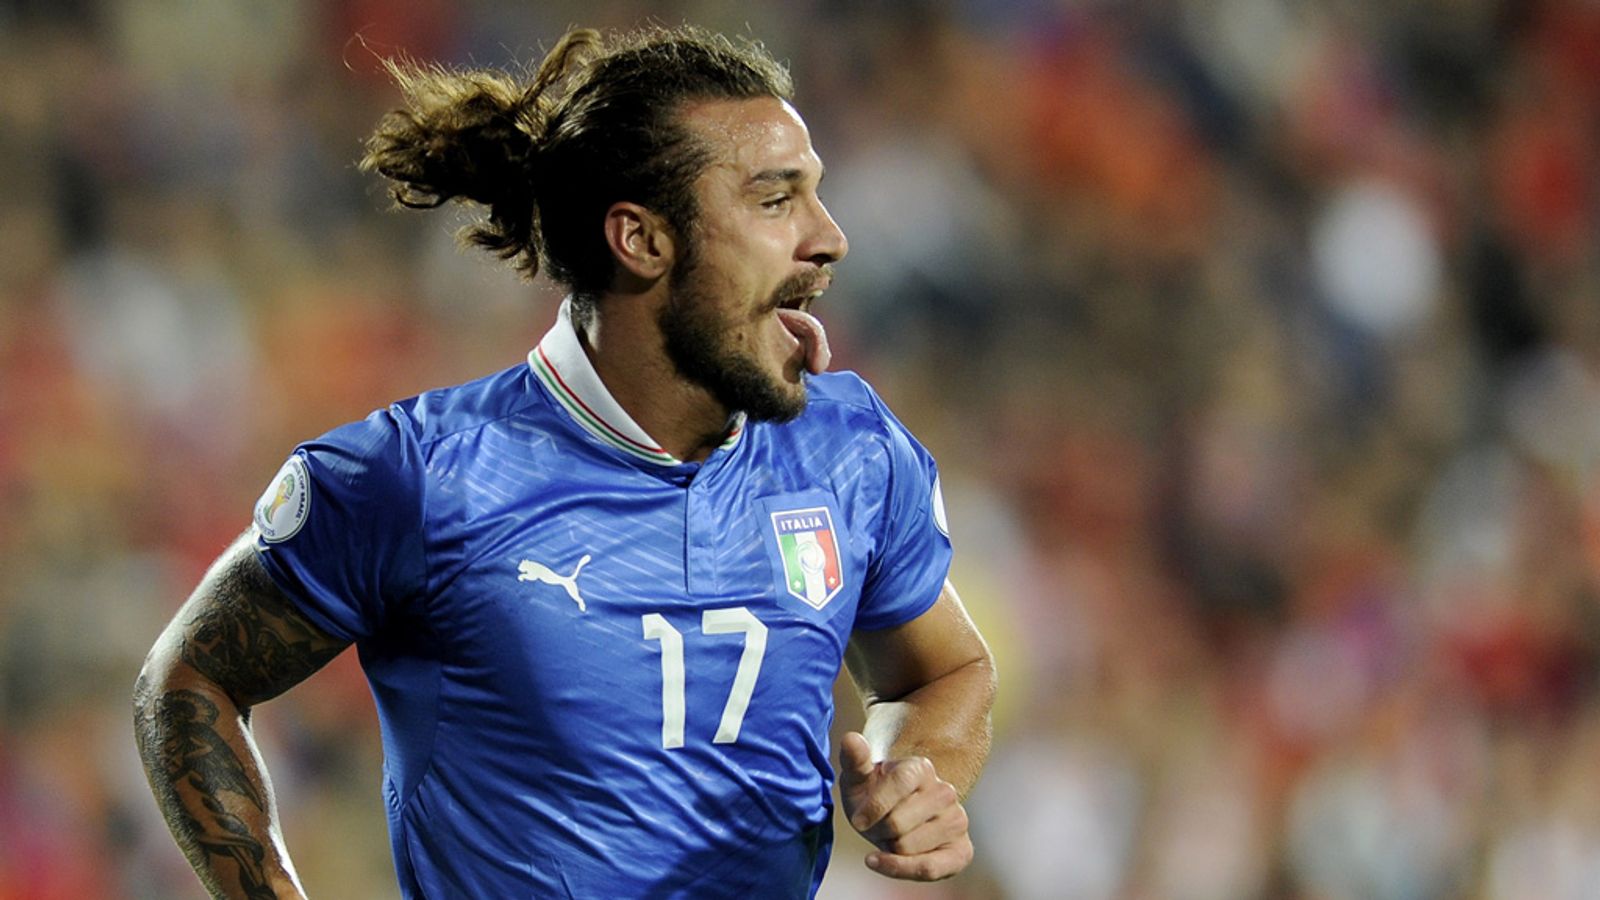 Pablo Osvaldo has been recalled to the Italy squad for a friendly meeting with Argentina | Football News | Sky Sports